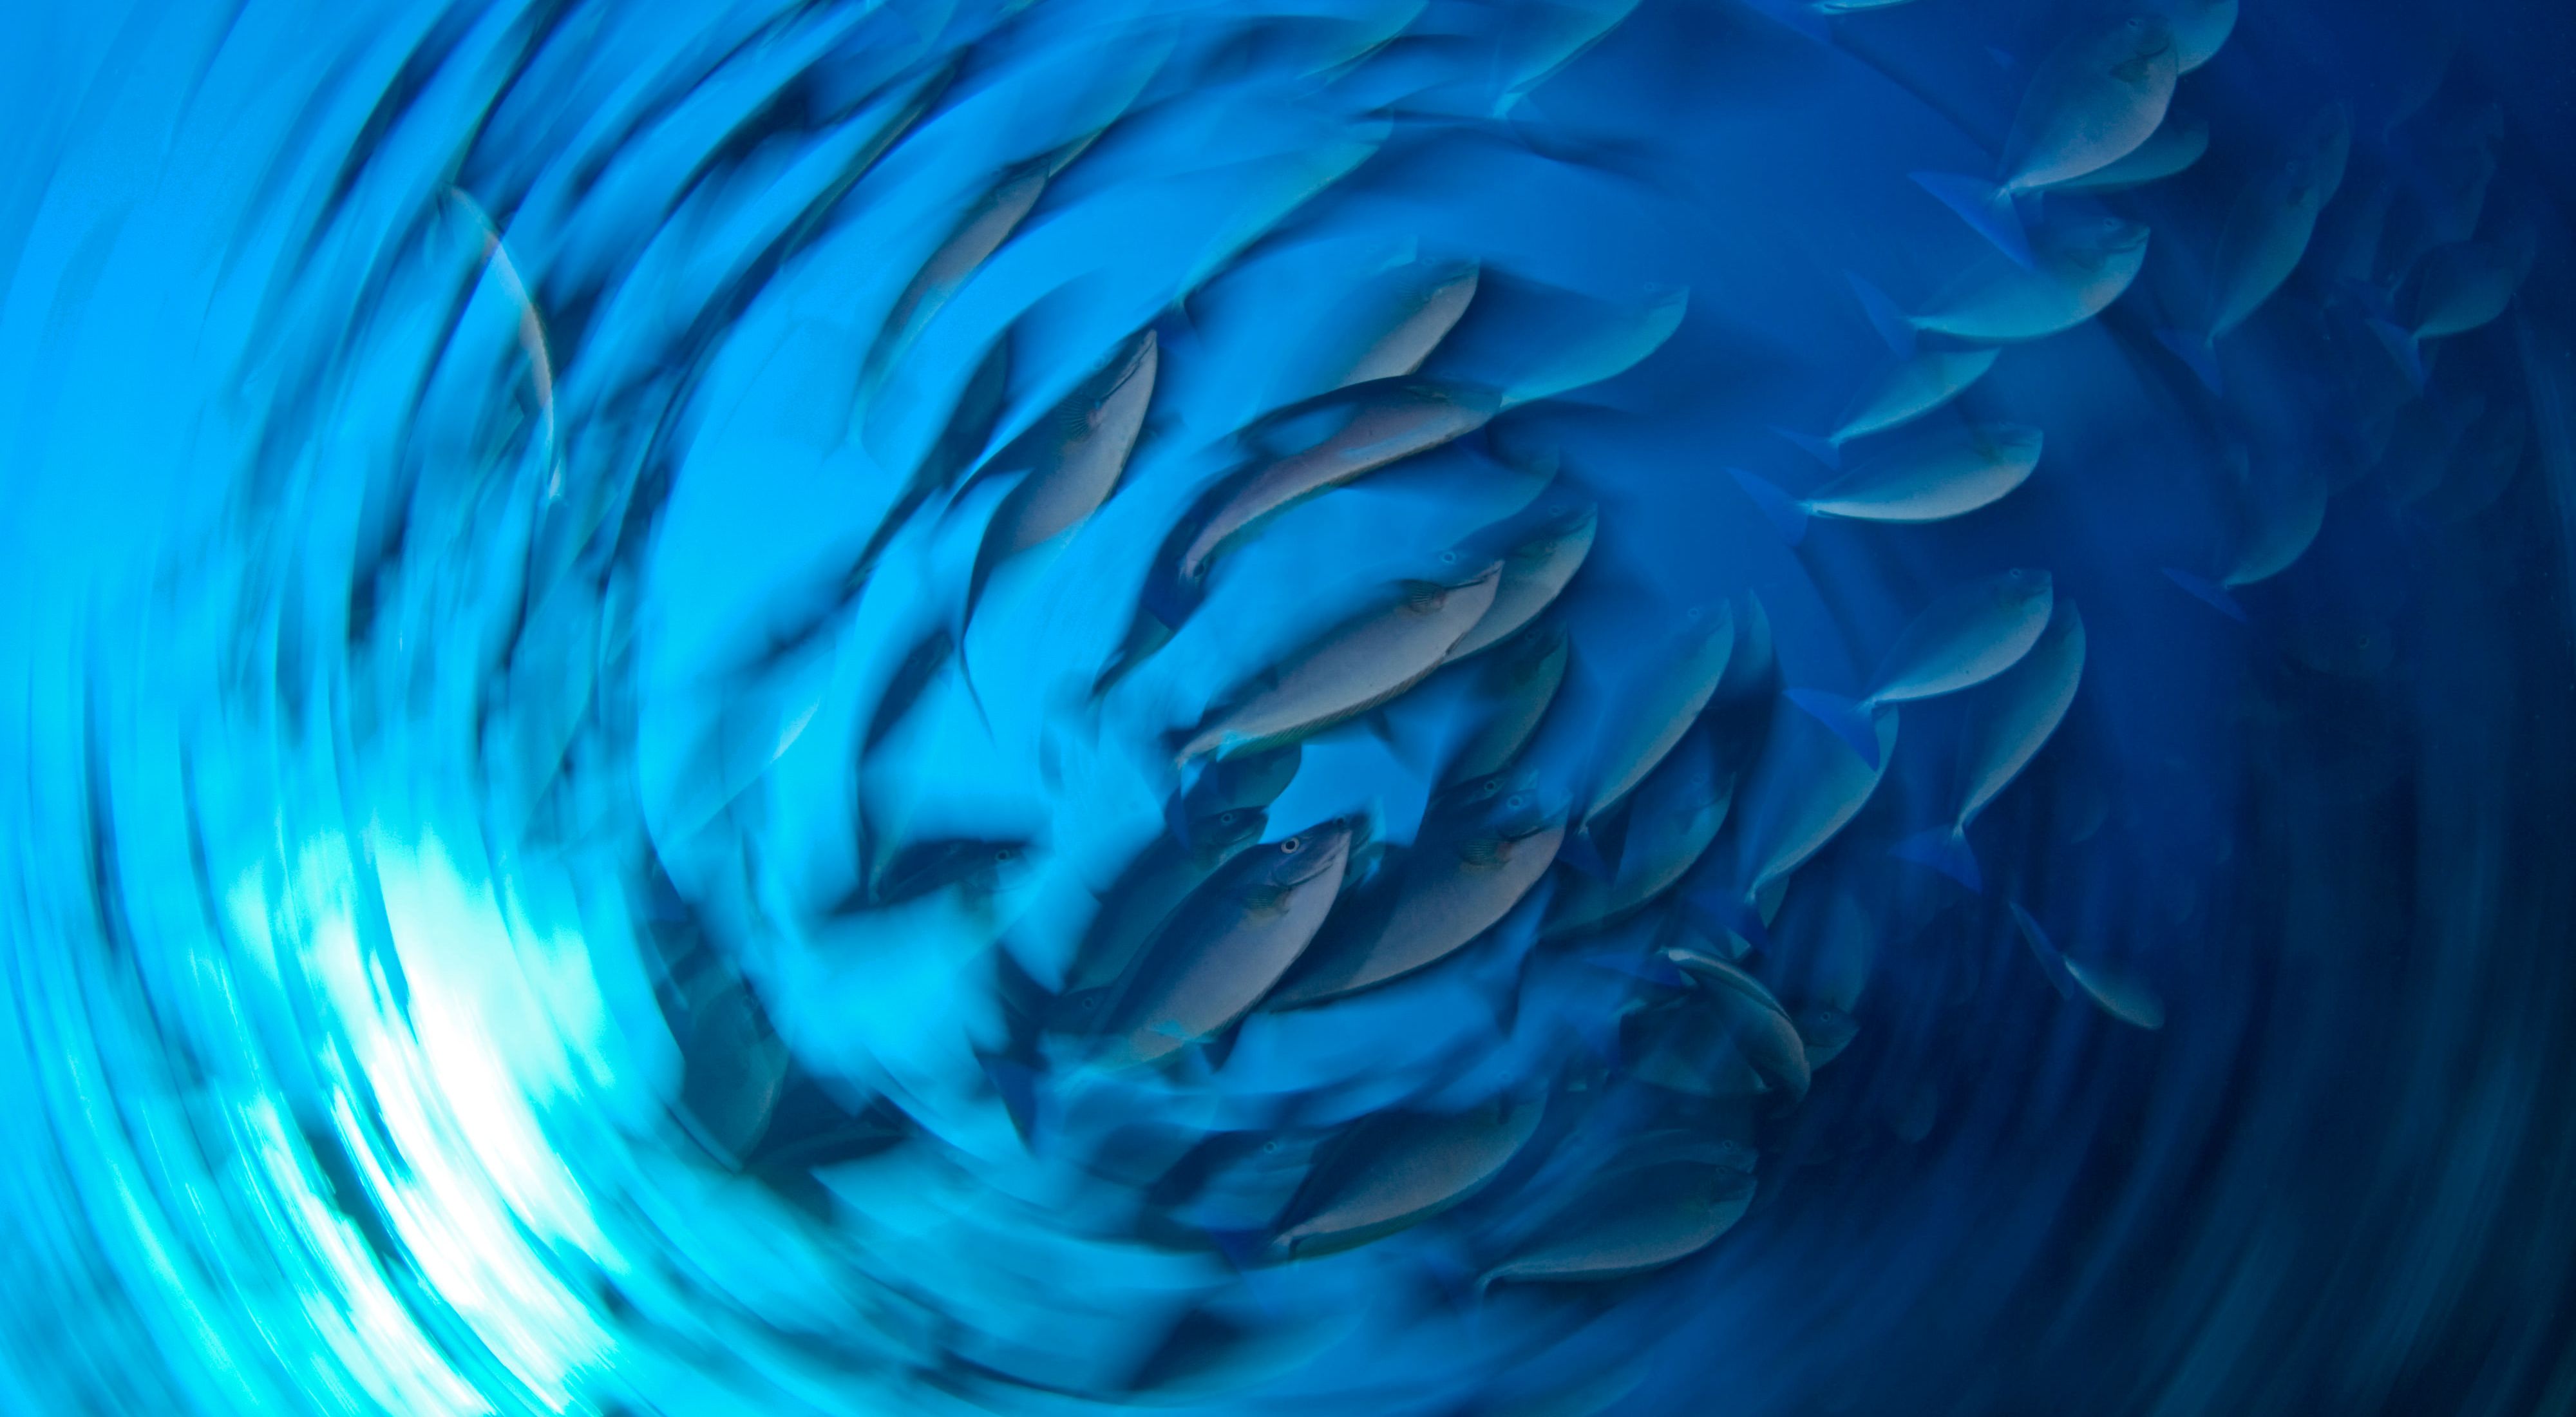 Image depicting a swirling school of fish in deep blue water.